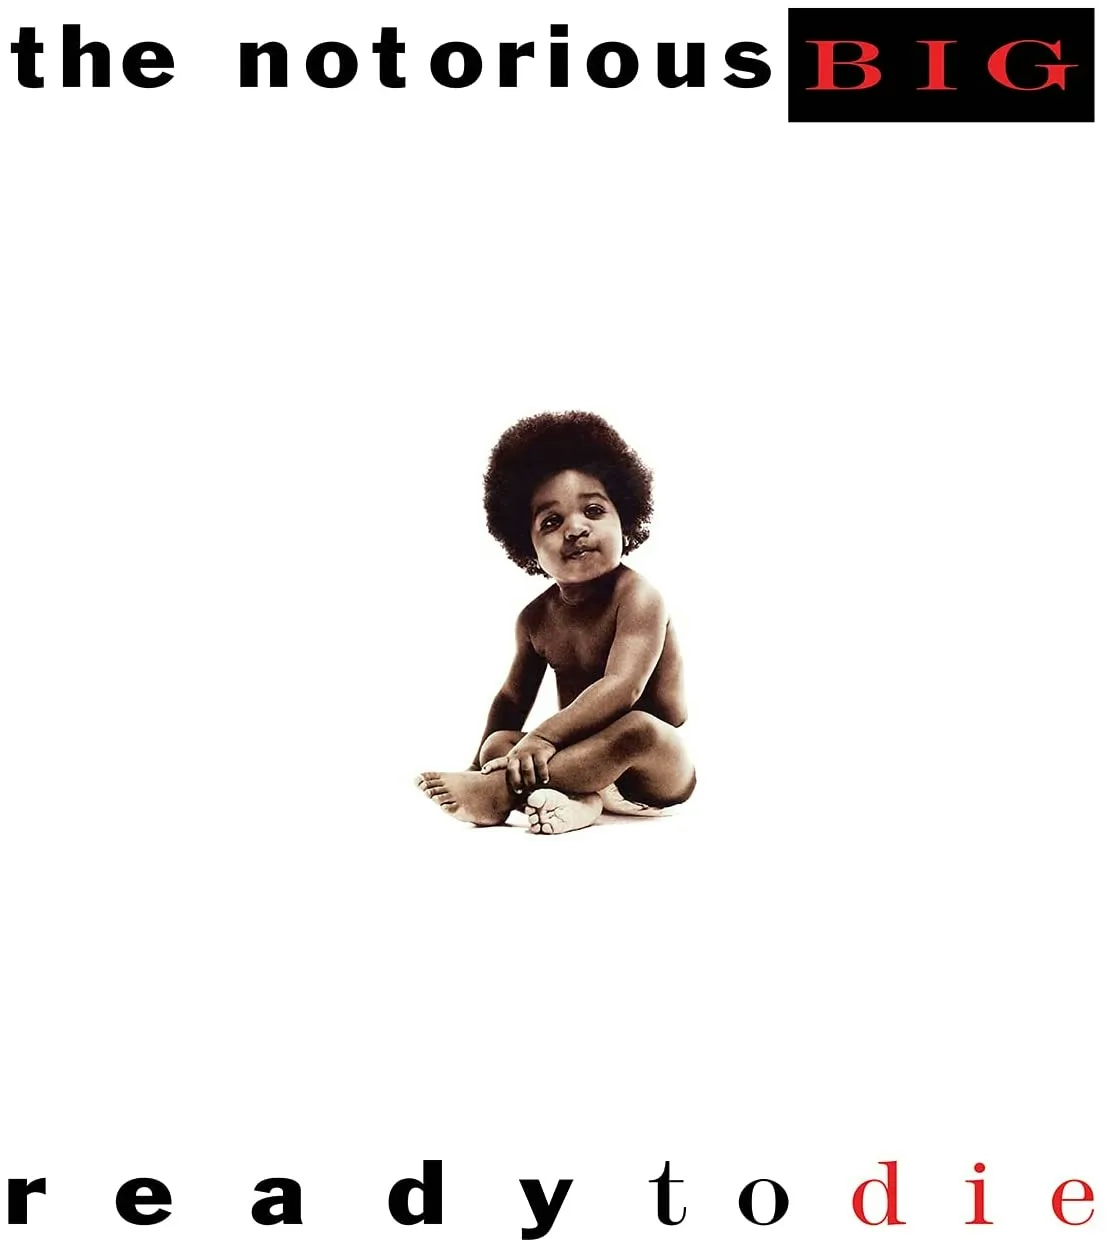 Album artwork for Ready To Die by The Notorious BIG